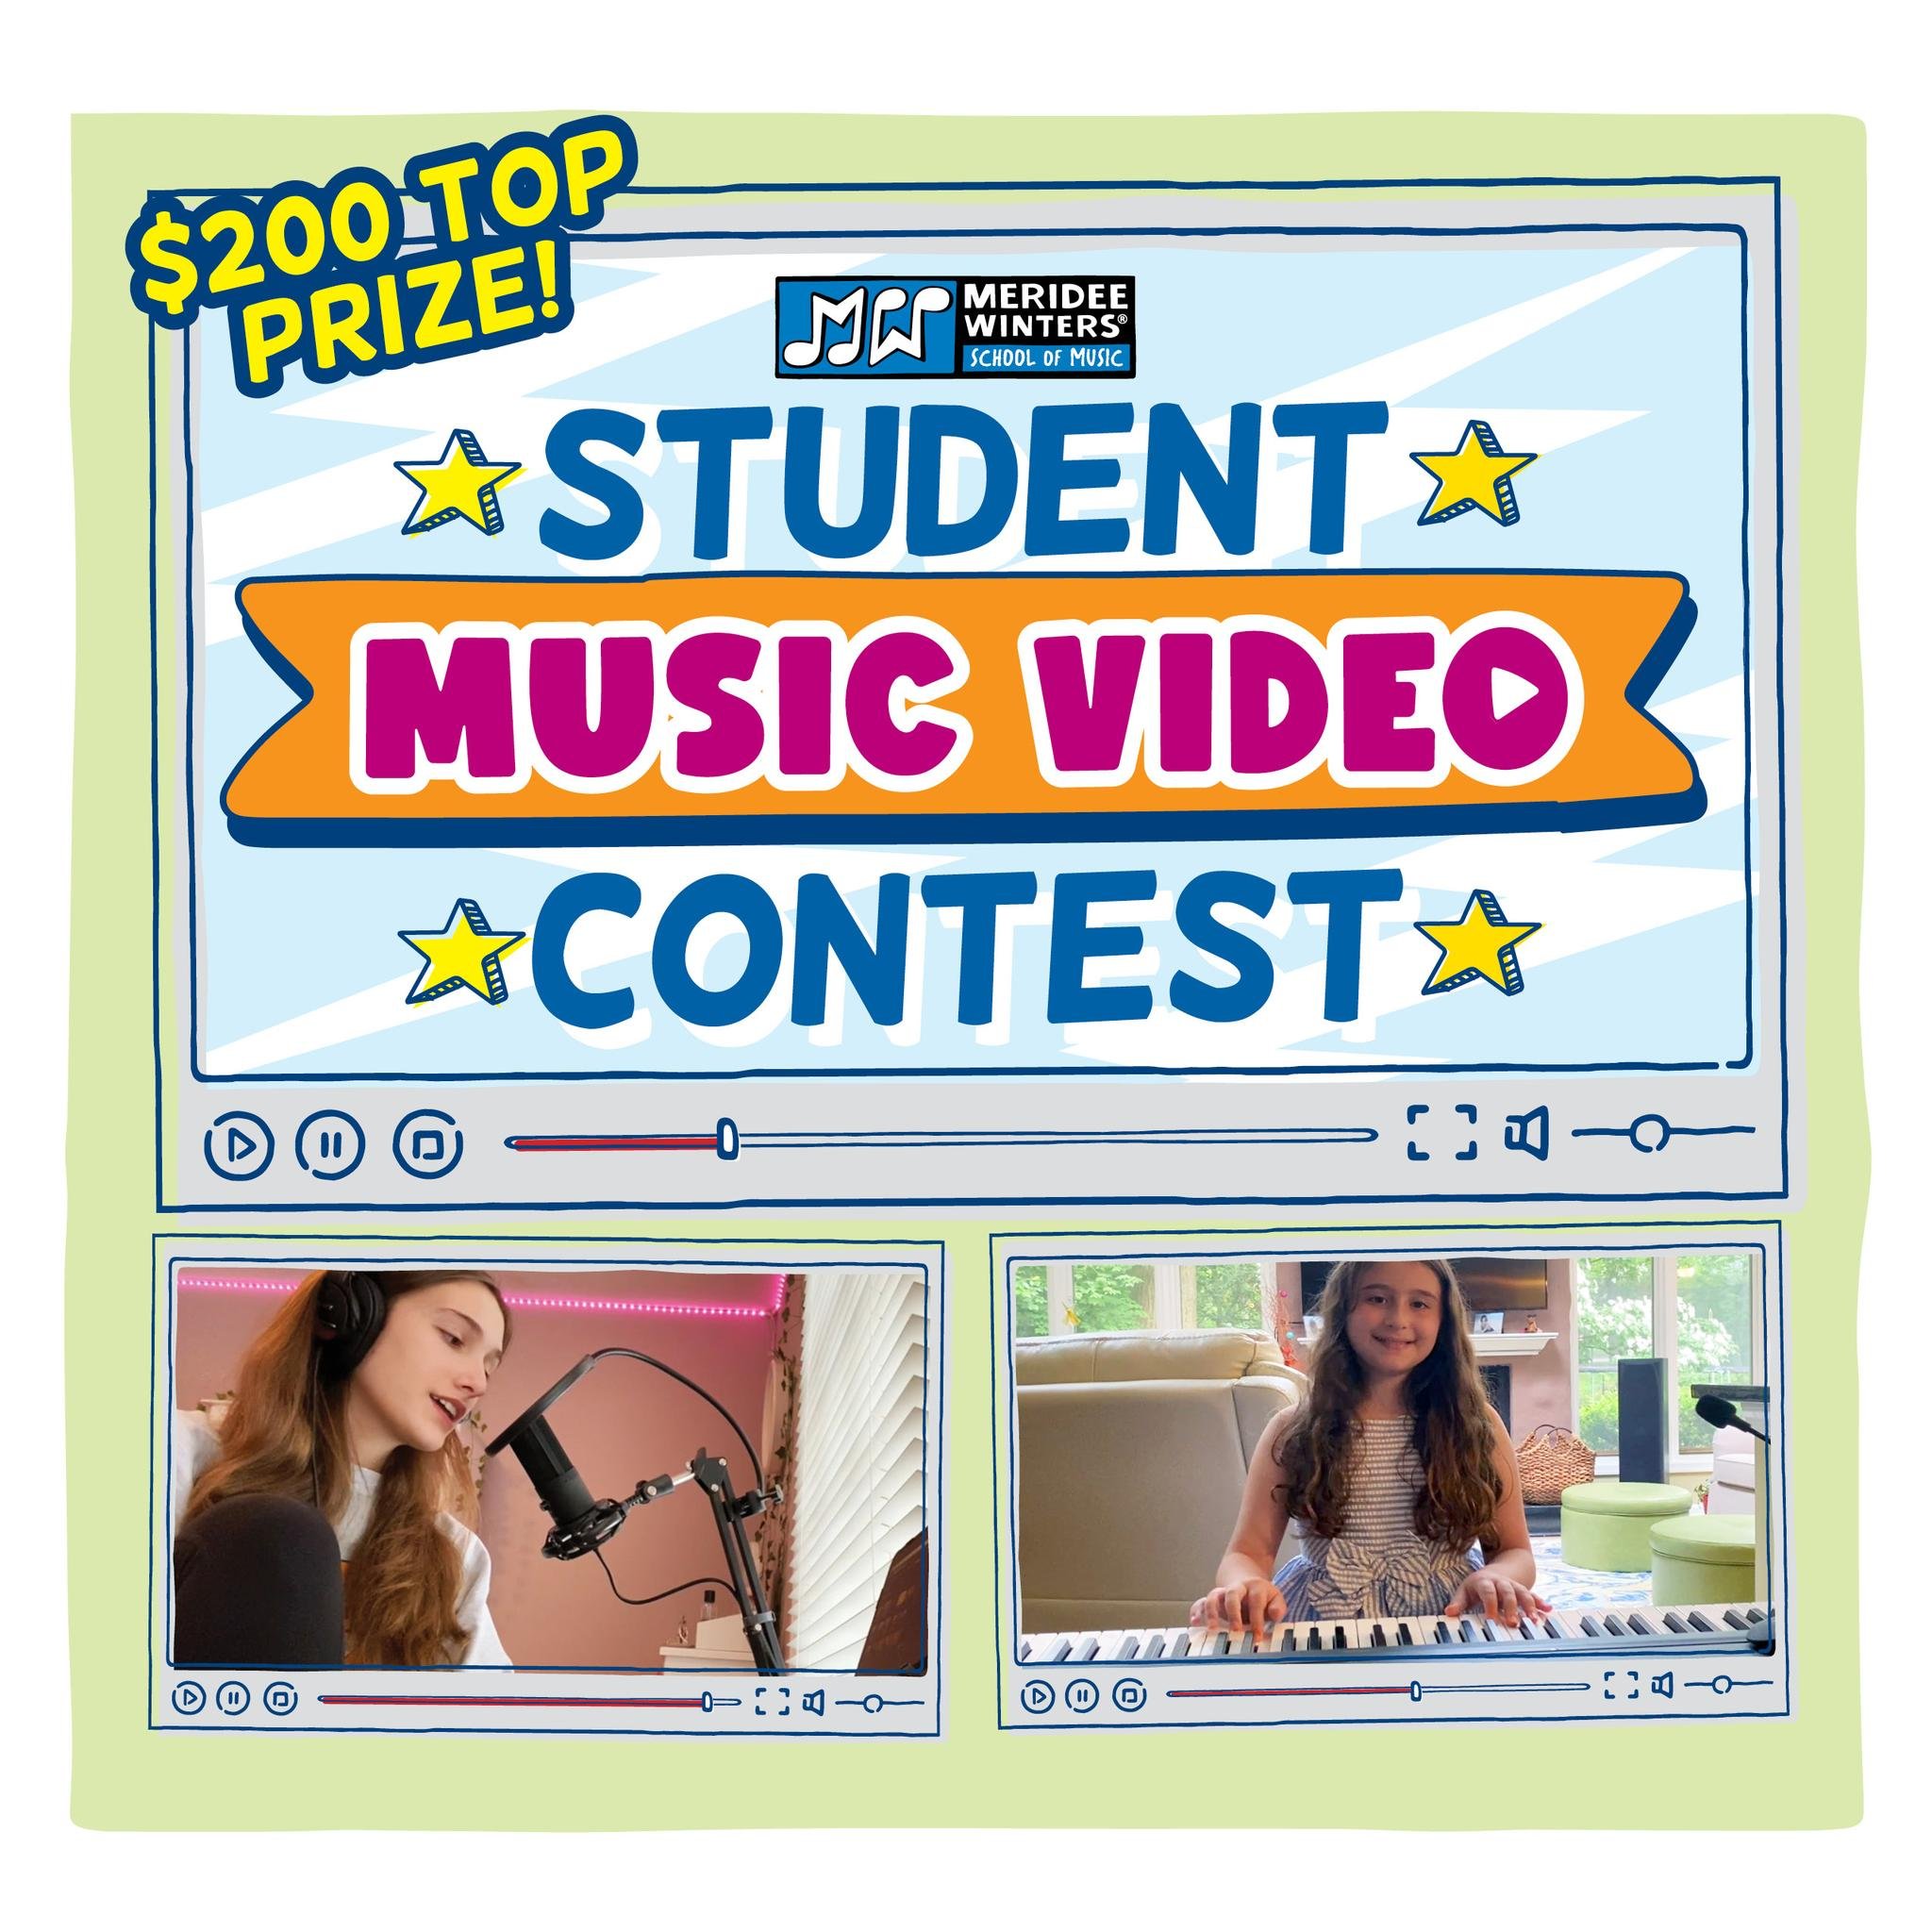 Just a reminder that our Year End Shows aren't the only exciting thing happening this semester! We've got a great student video contest happening too Start working on those videos now to turn in next month! More info here: https://www.mwschoolofmusic